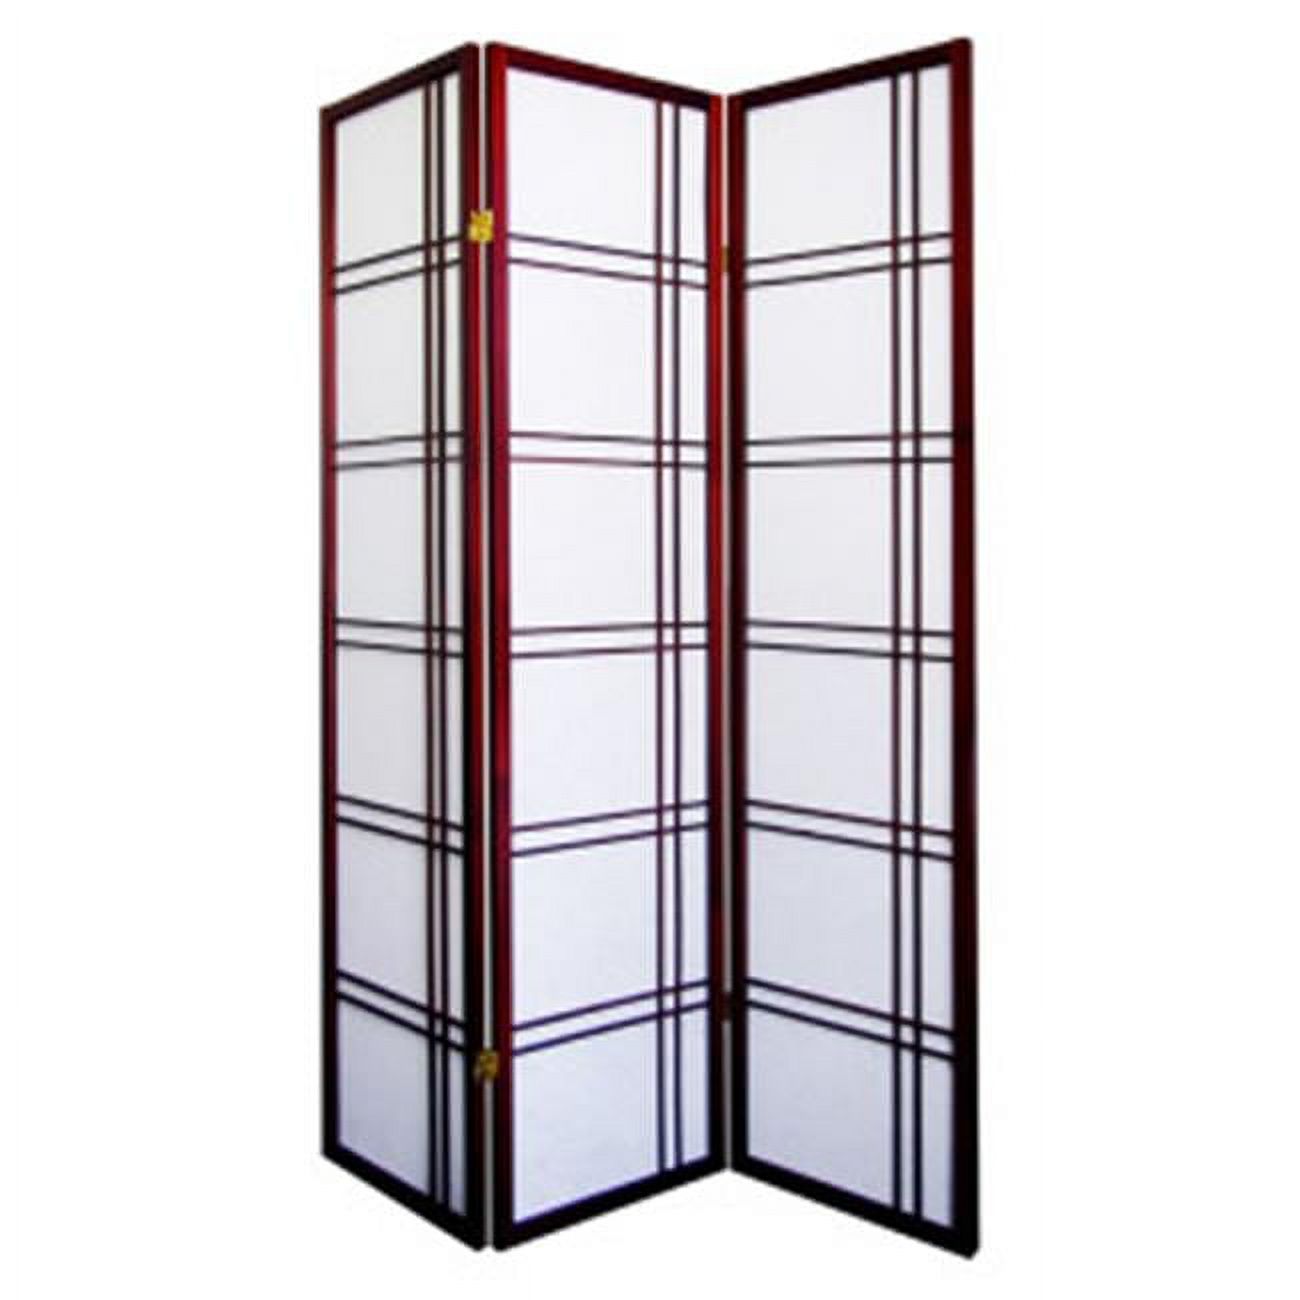 Ore Furniture  Girard 3-Panel Room Divider - Cherry - image 1 of 2